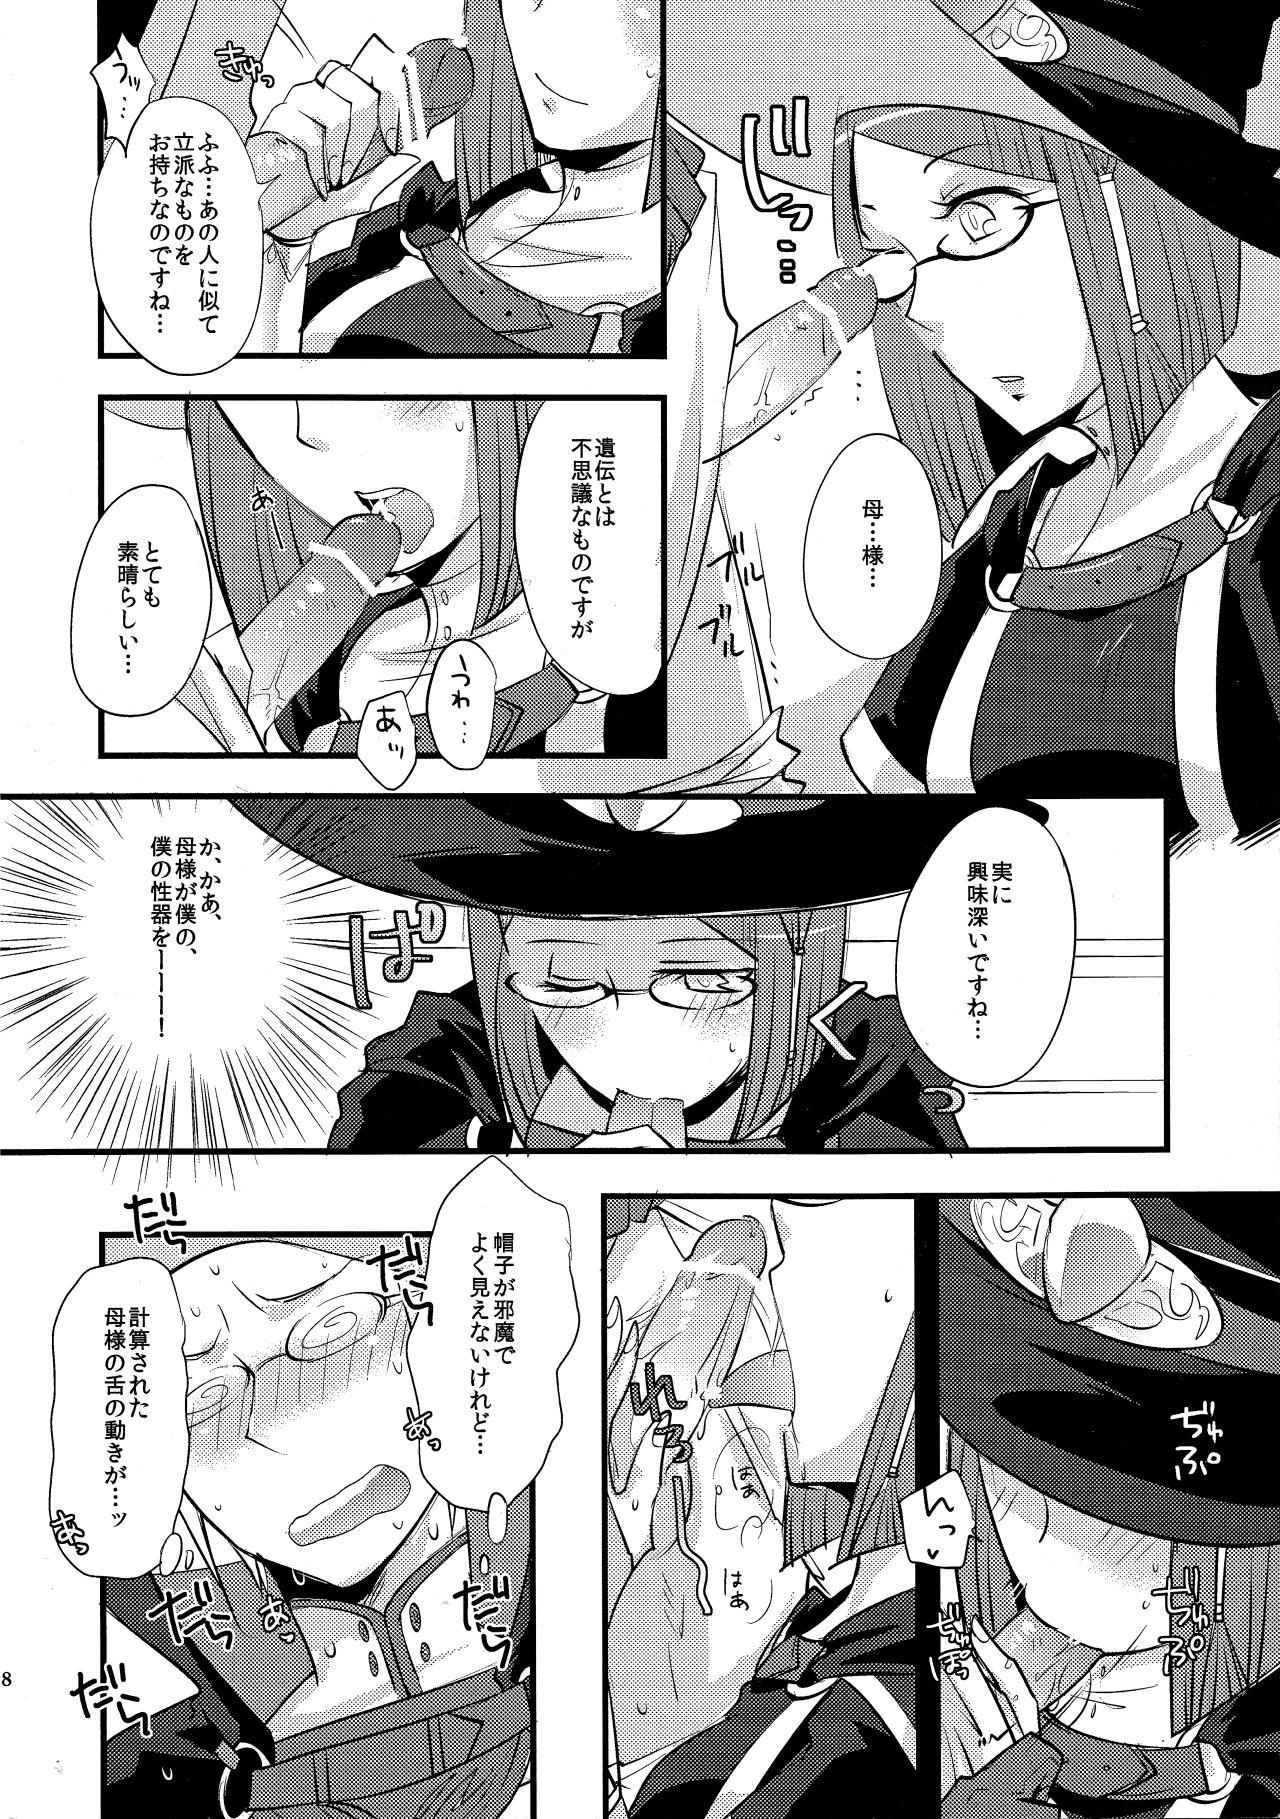 Perfect Butt Maza☆Con - Fire emblem awakening Free Oral Sex - Page 7